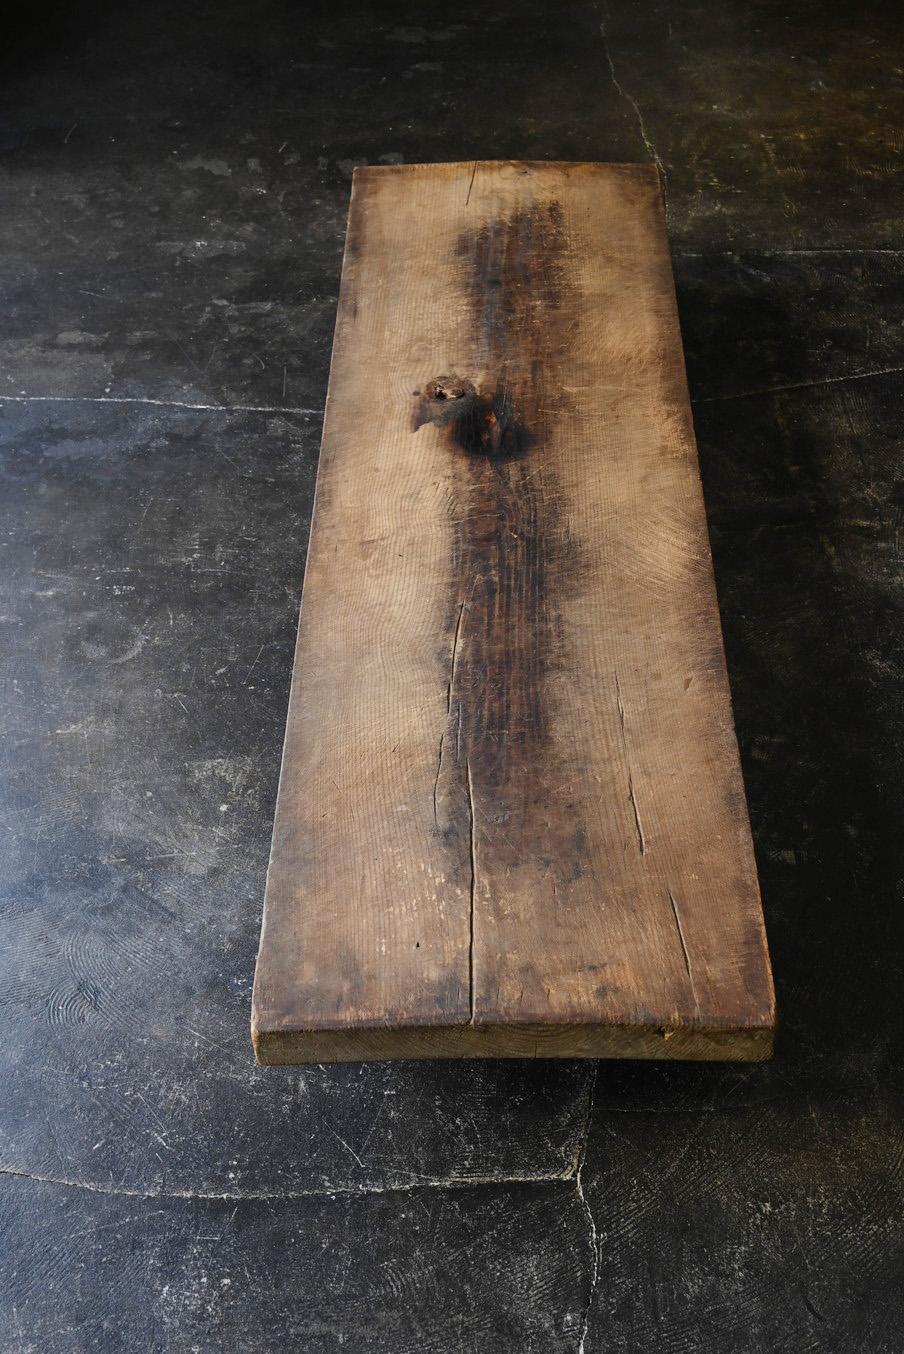 This is a very old Japanese wooden table.
The material is made of pine wood.
The year of production is written on the back of the table.
It is written that it was made in June 1867, ``June 3rd year of Keio'', towards the end of the Edo period.

It